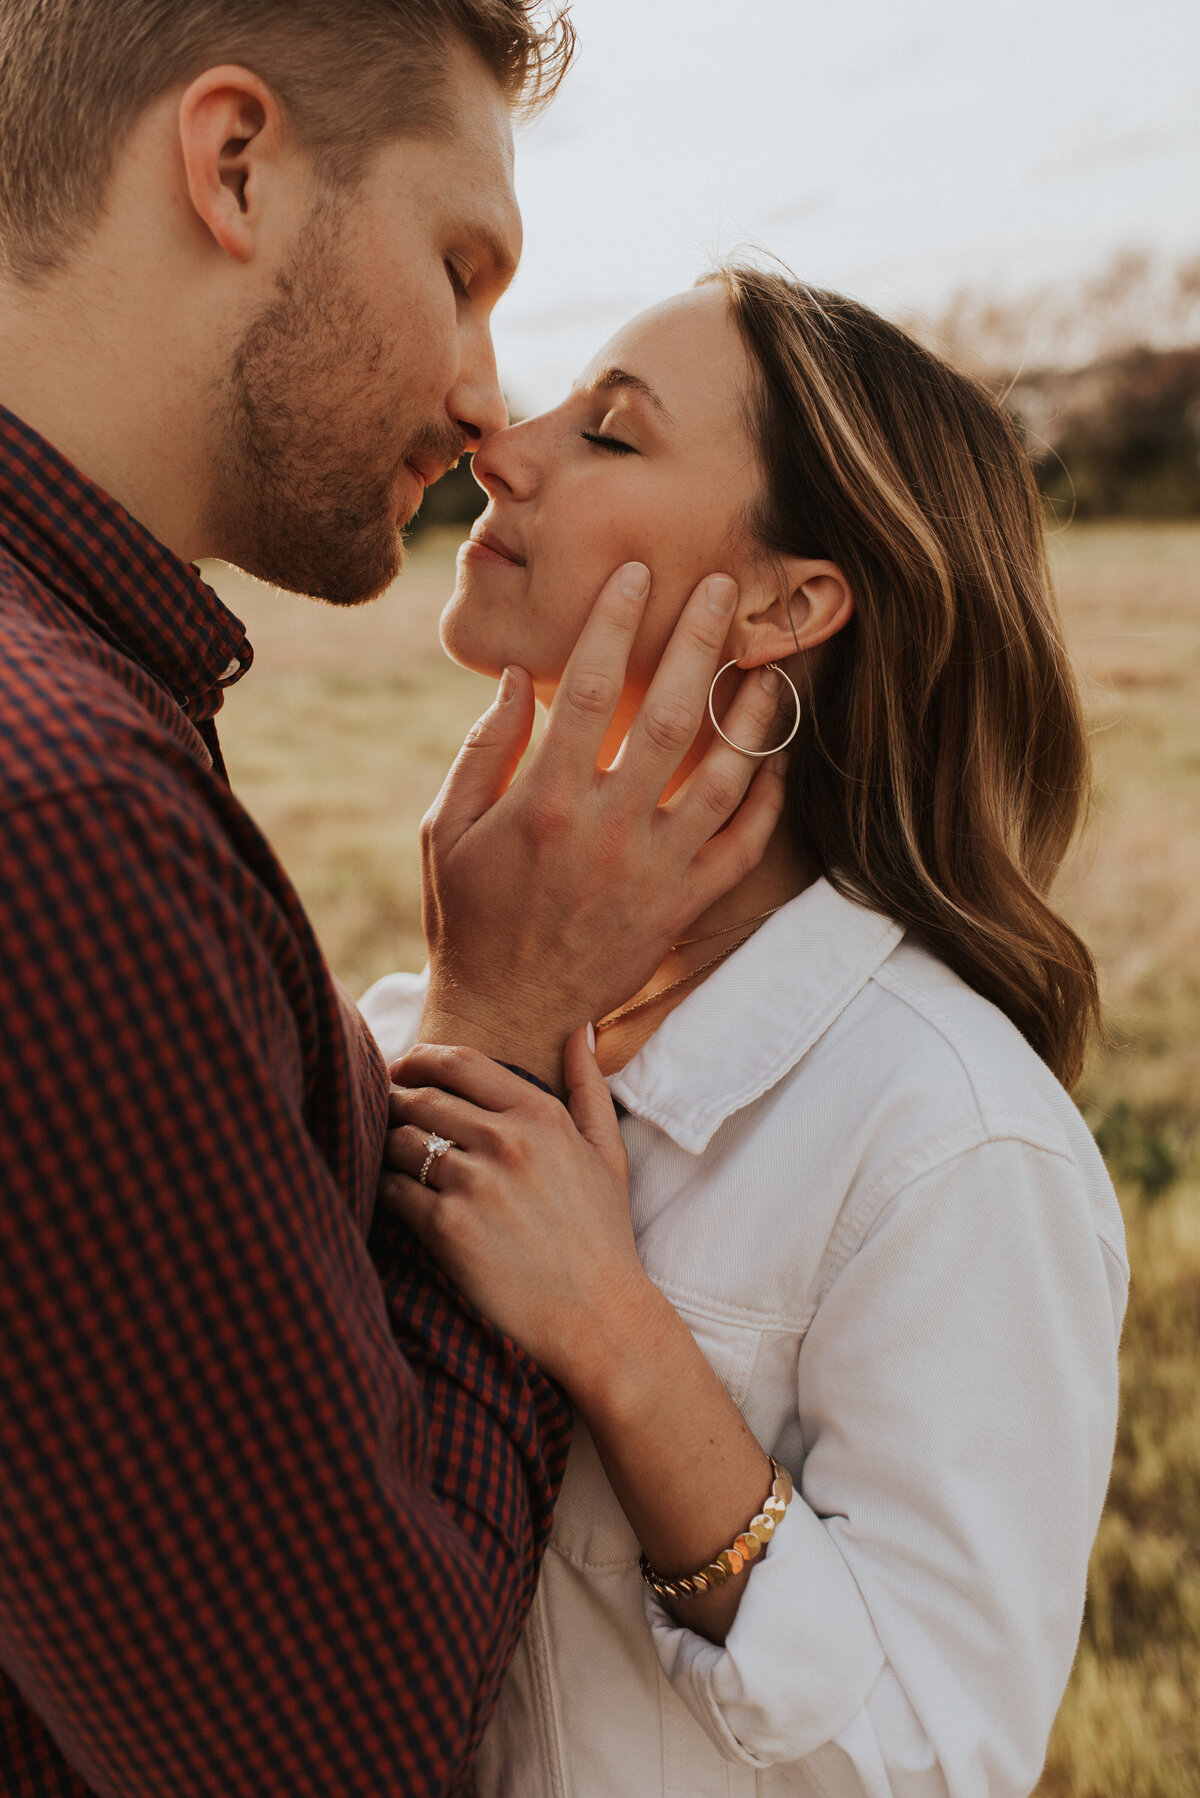 kyle-and-katie-marriage-proposal-at-winfrey-point-dallas-by-bruna-kitchen-photography-29